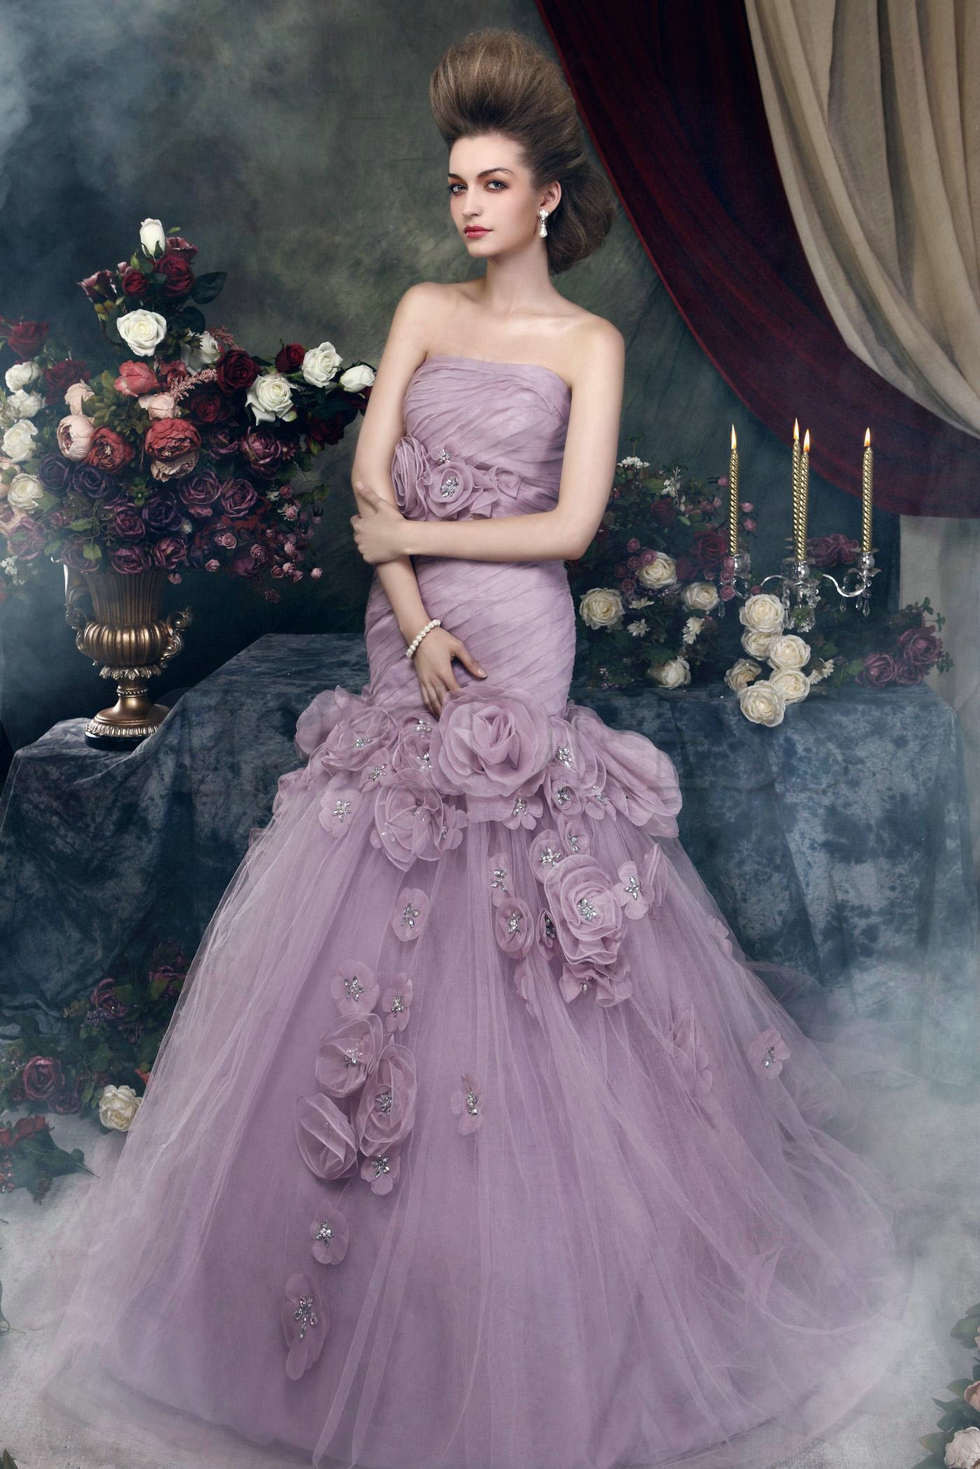 Wedding Gowns With Color
 So Charming on a Purple Wedding Gown